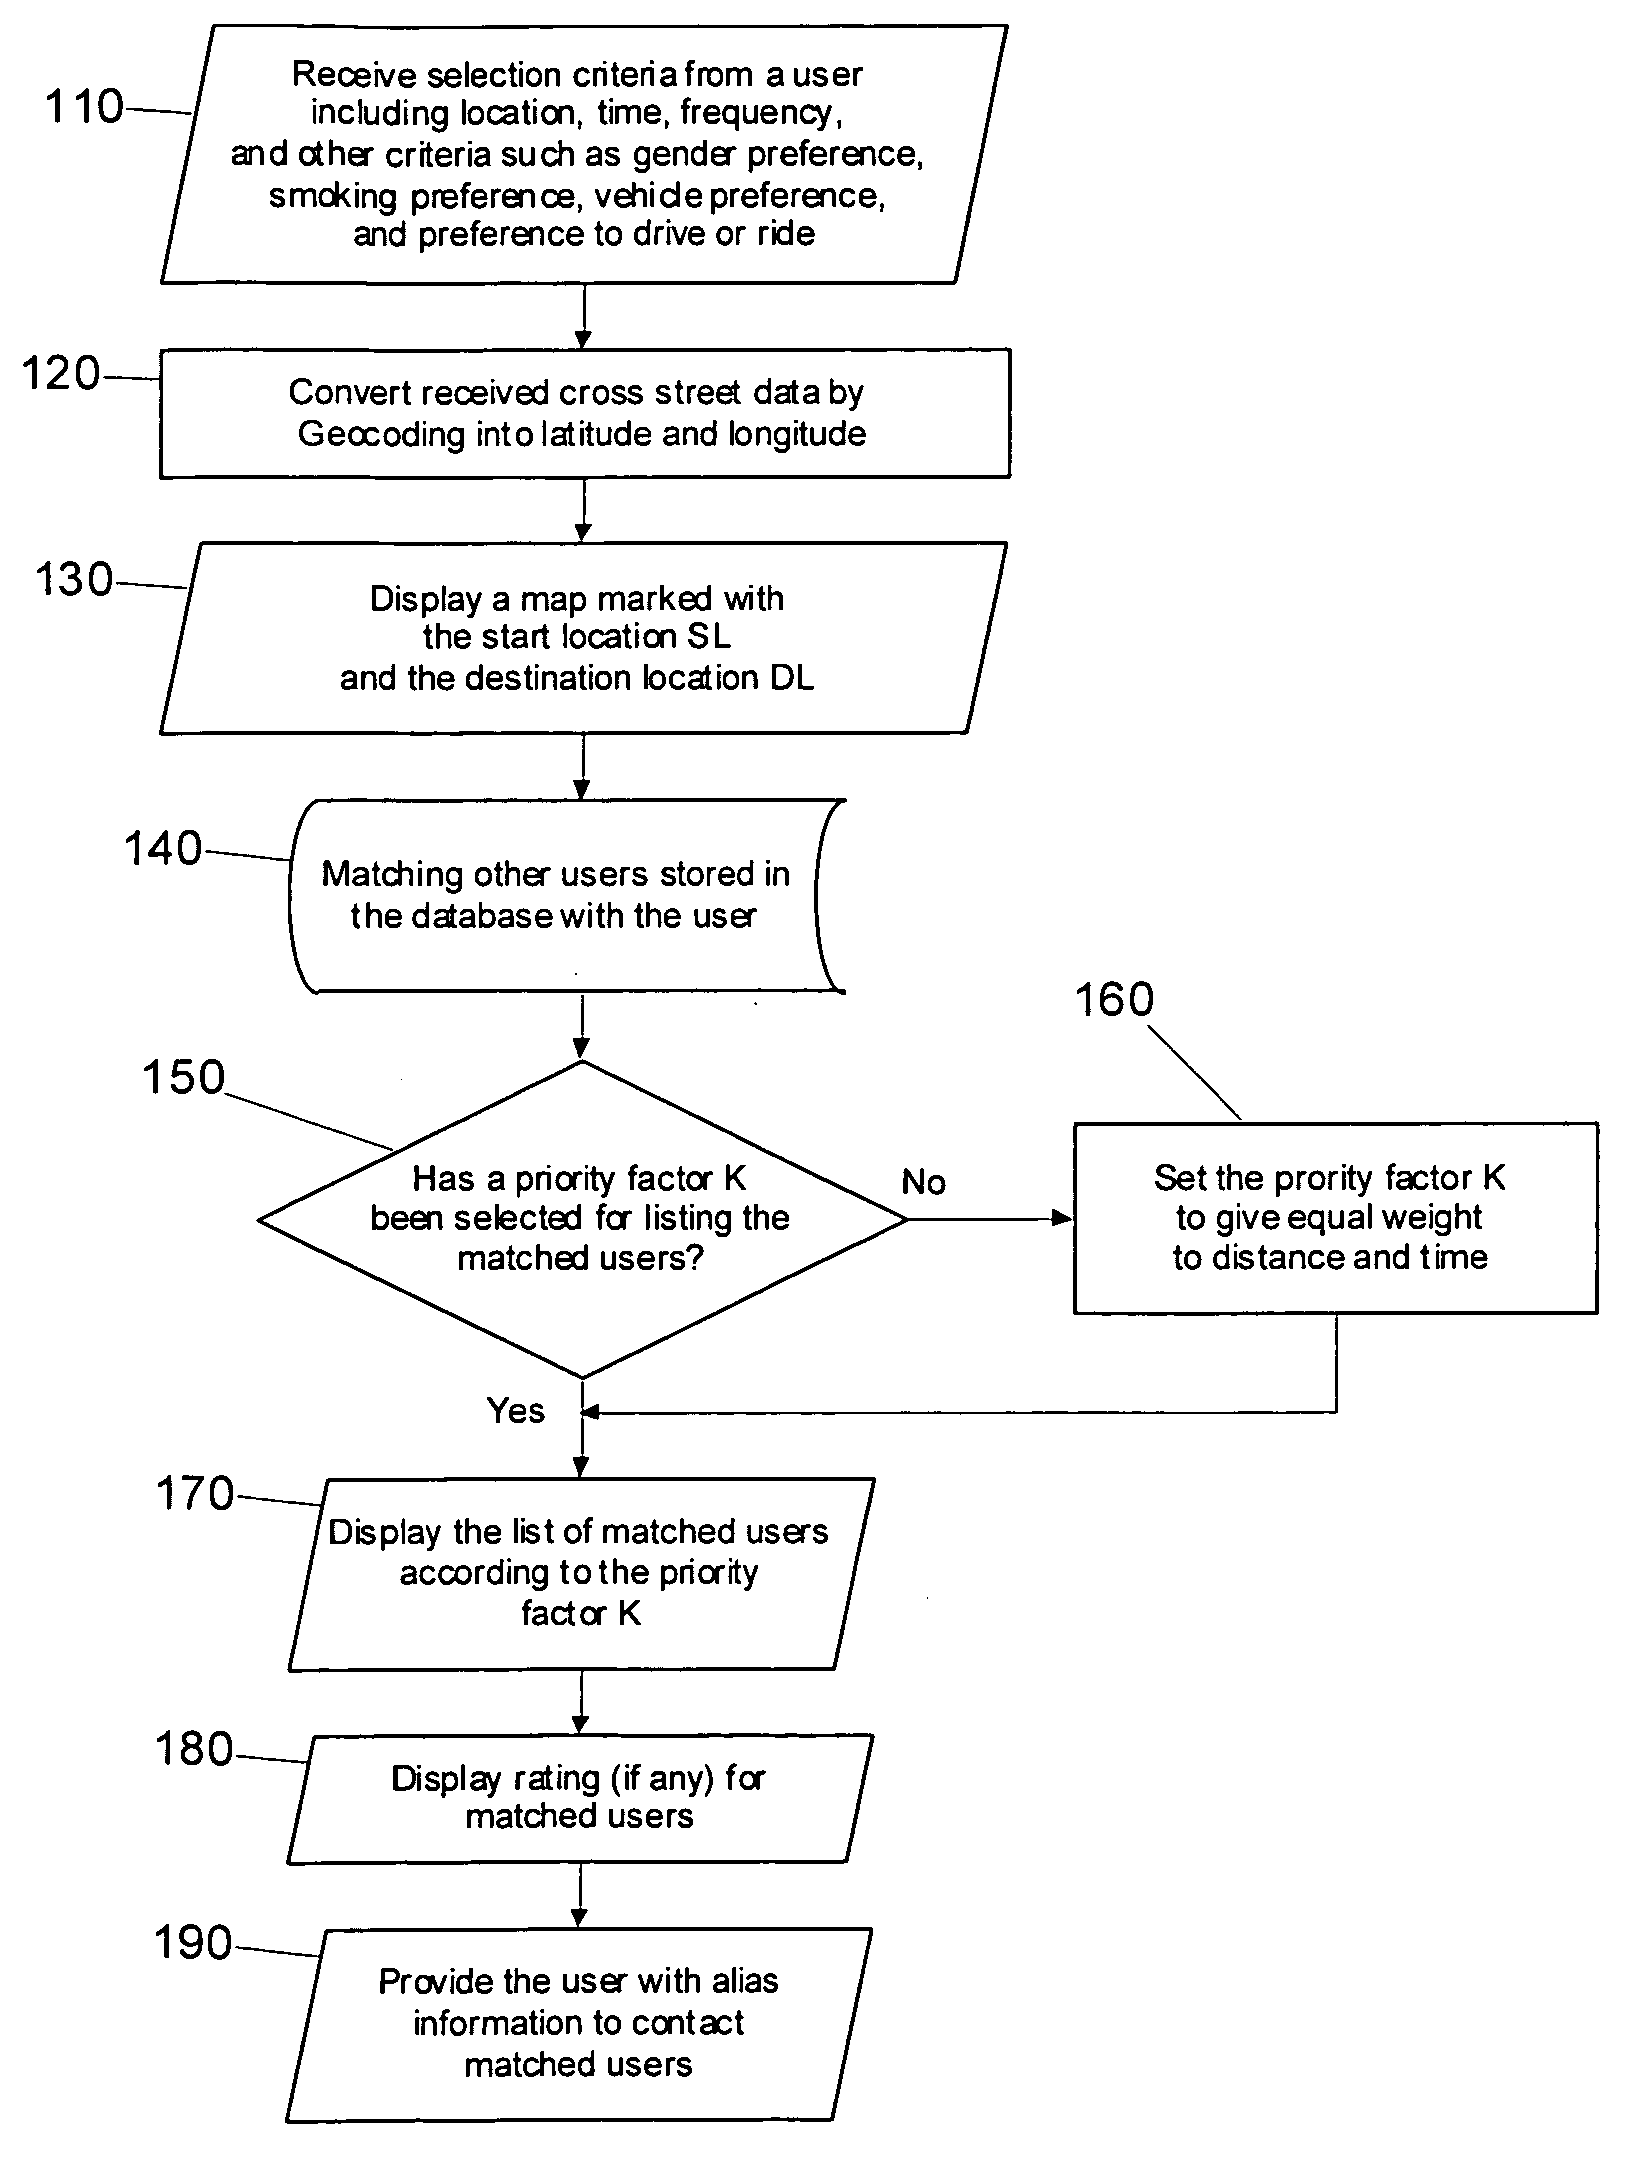 System and method for ride matching